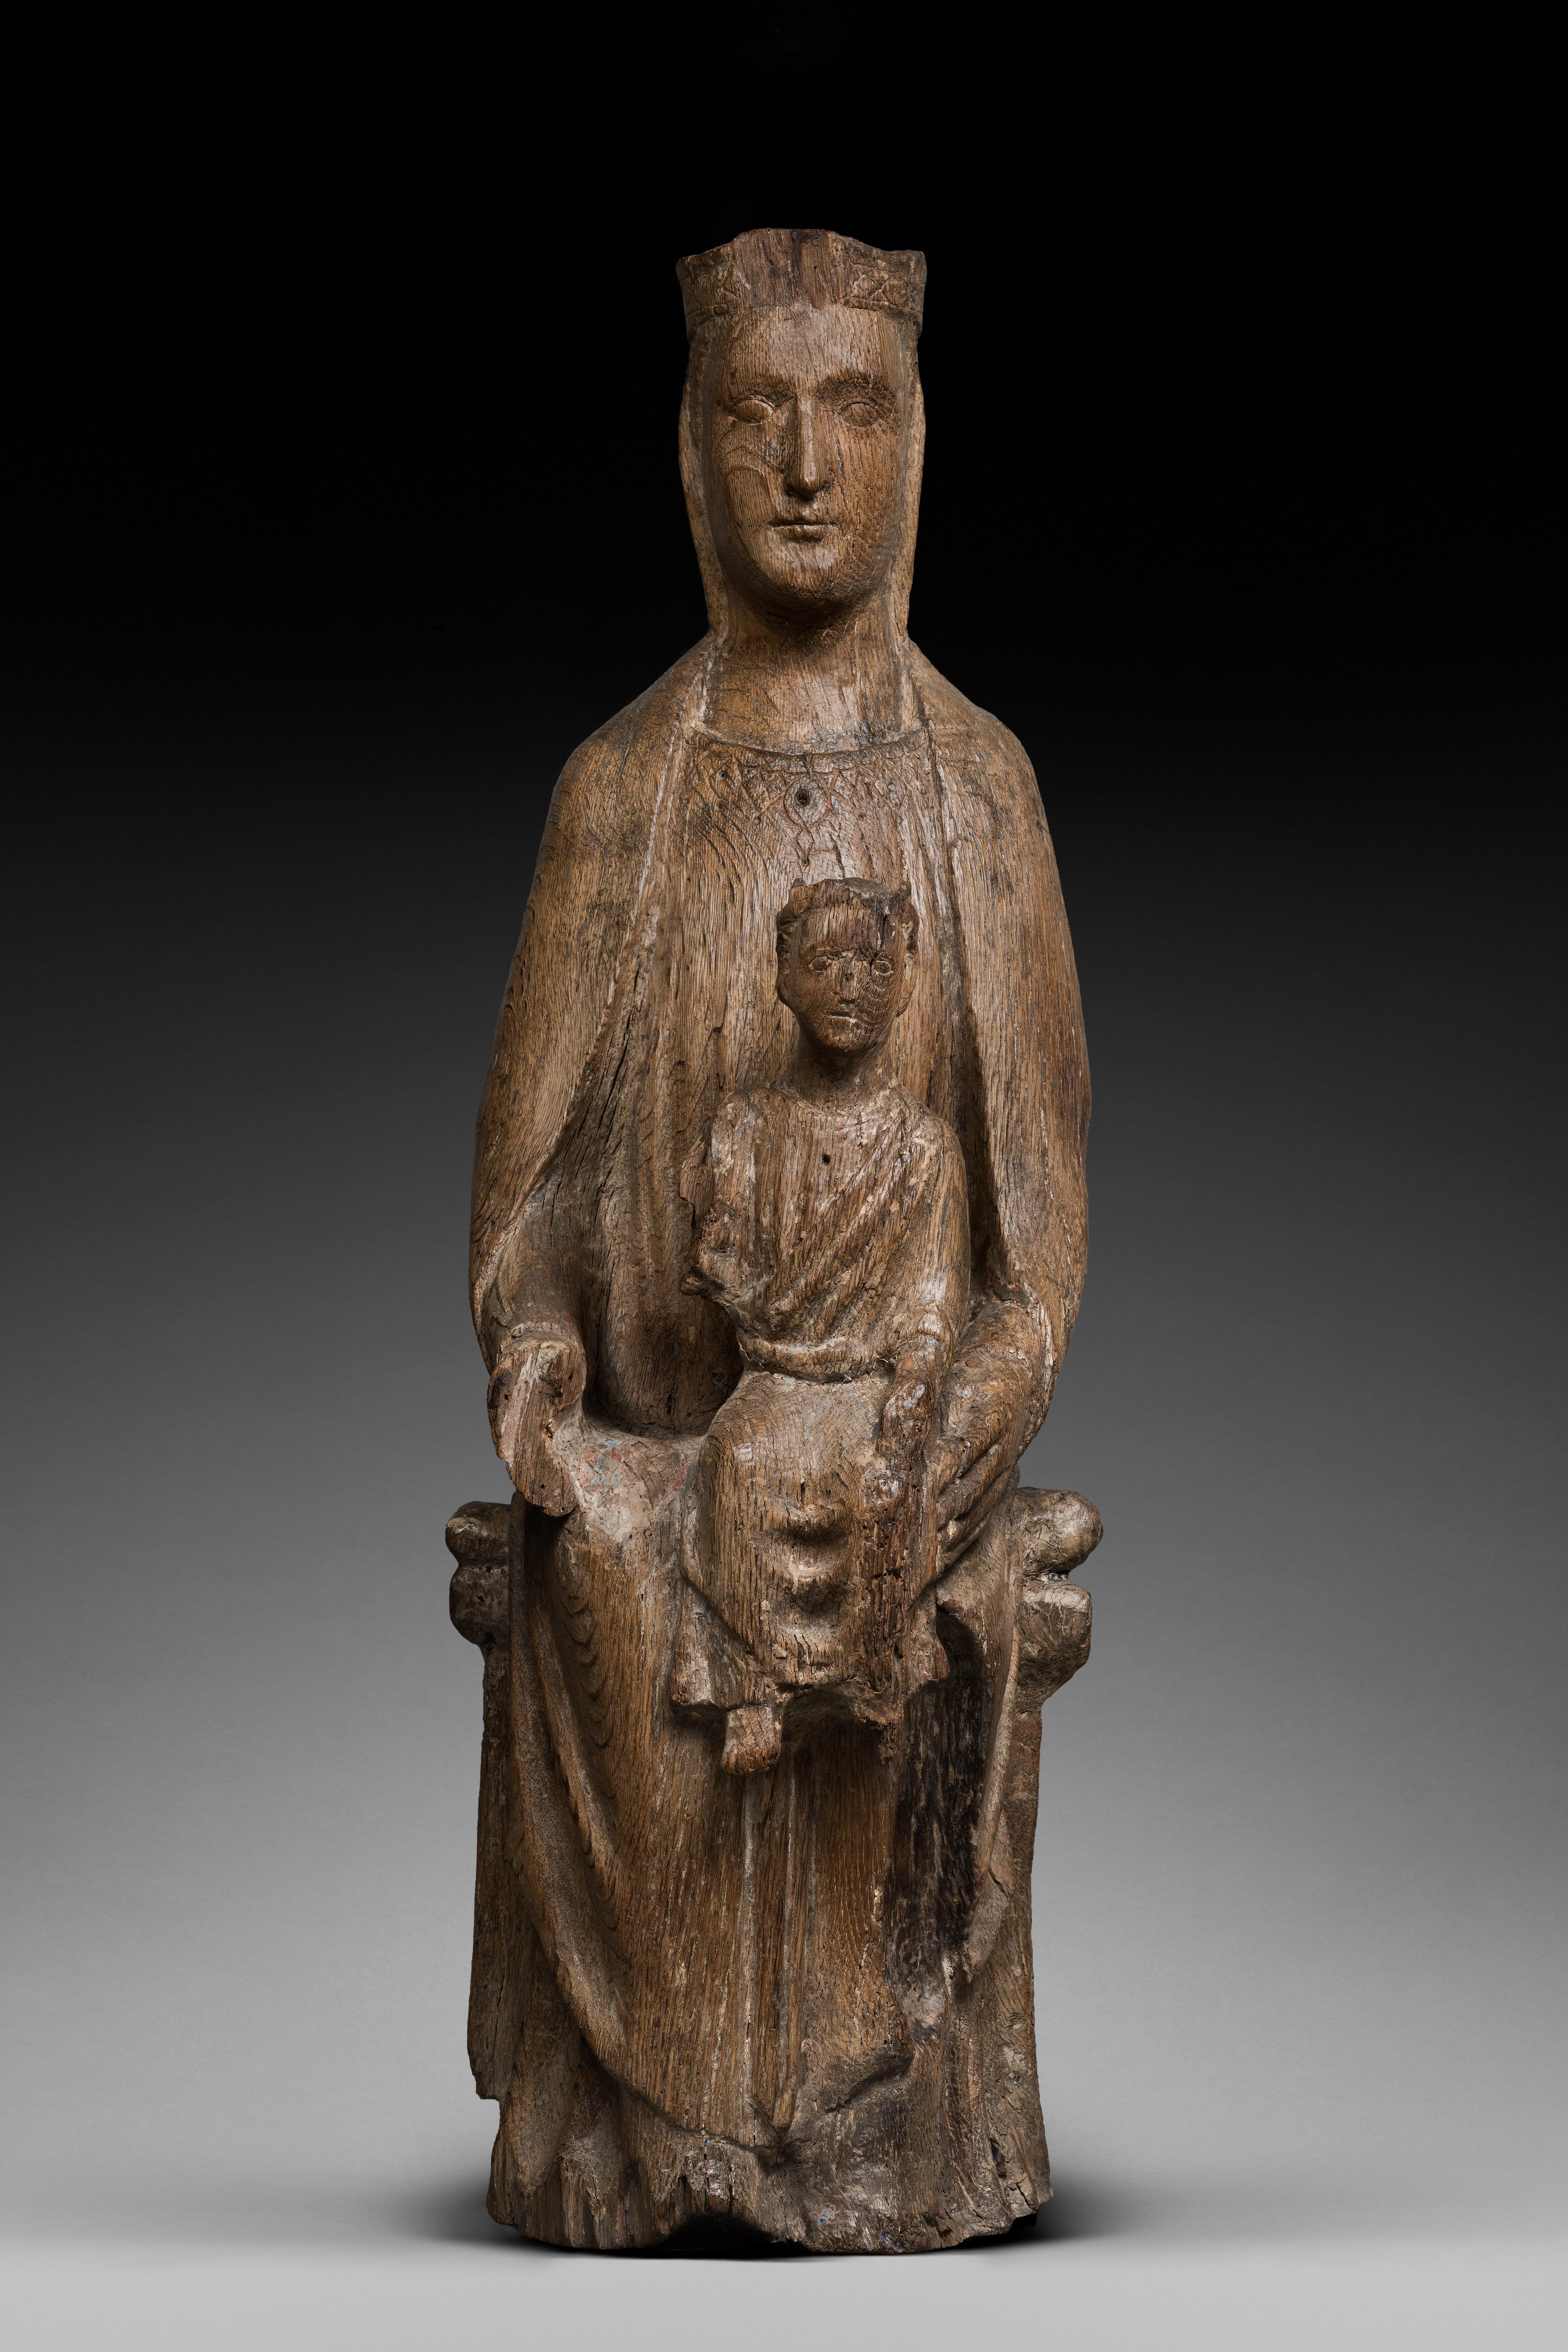 IMPORTANT SEDES SAPIENTIAE VIRGIN AND CHILD 
ALSO CALLED « THRONE OF WISDOM »

ORIGIN: FRANCE, BURGUNDY
PERIOD: EARLY 13th CENTURY

Height : 75 cm
Length : 24 cm
Depth : 17 cm

Oakwood, traces of polychromy, hollowed back


This Virgin and Child